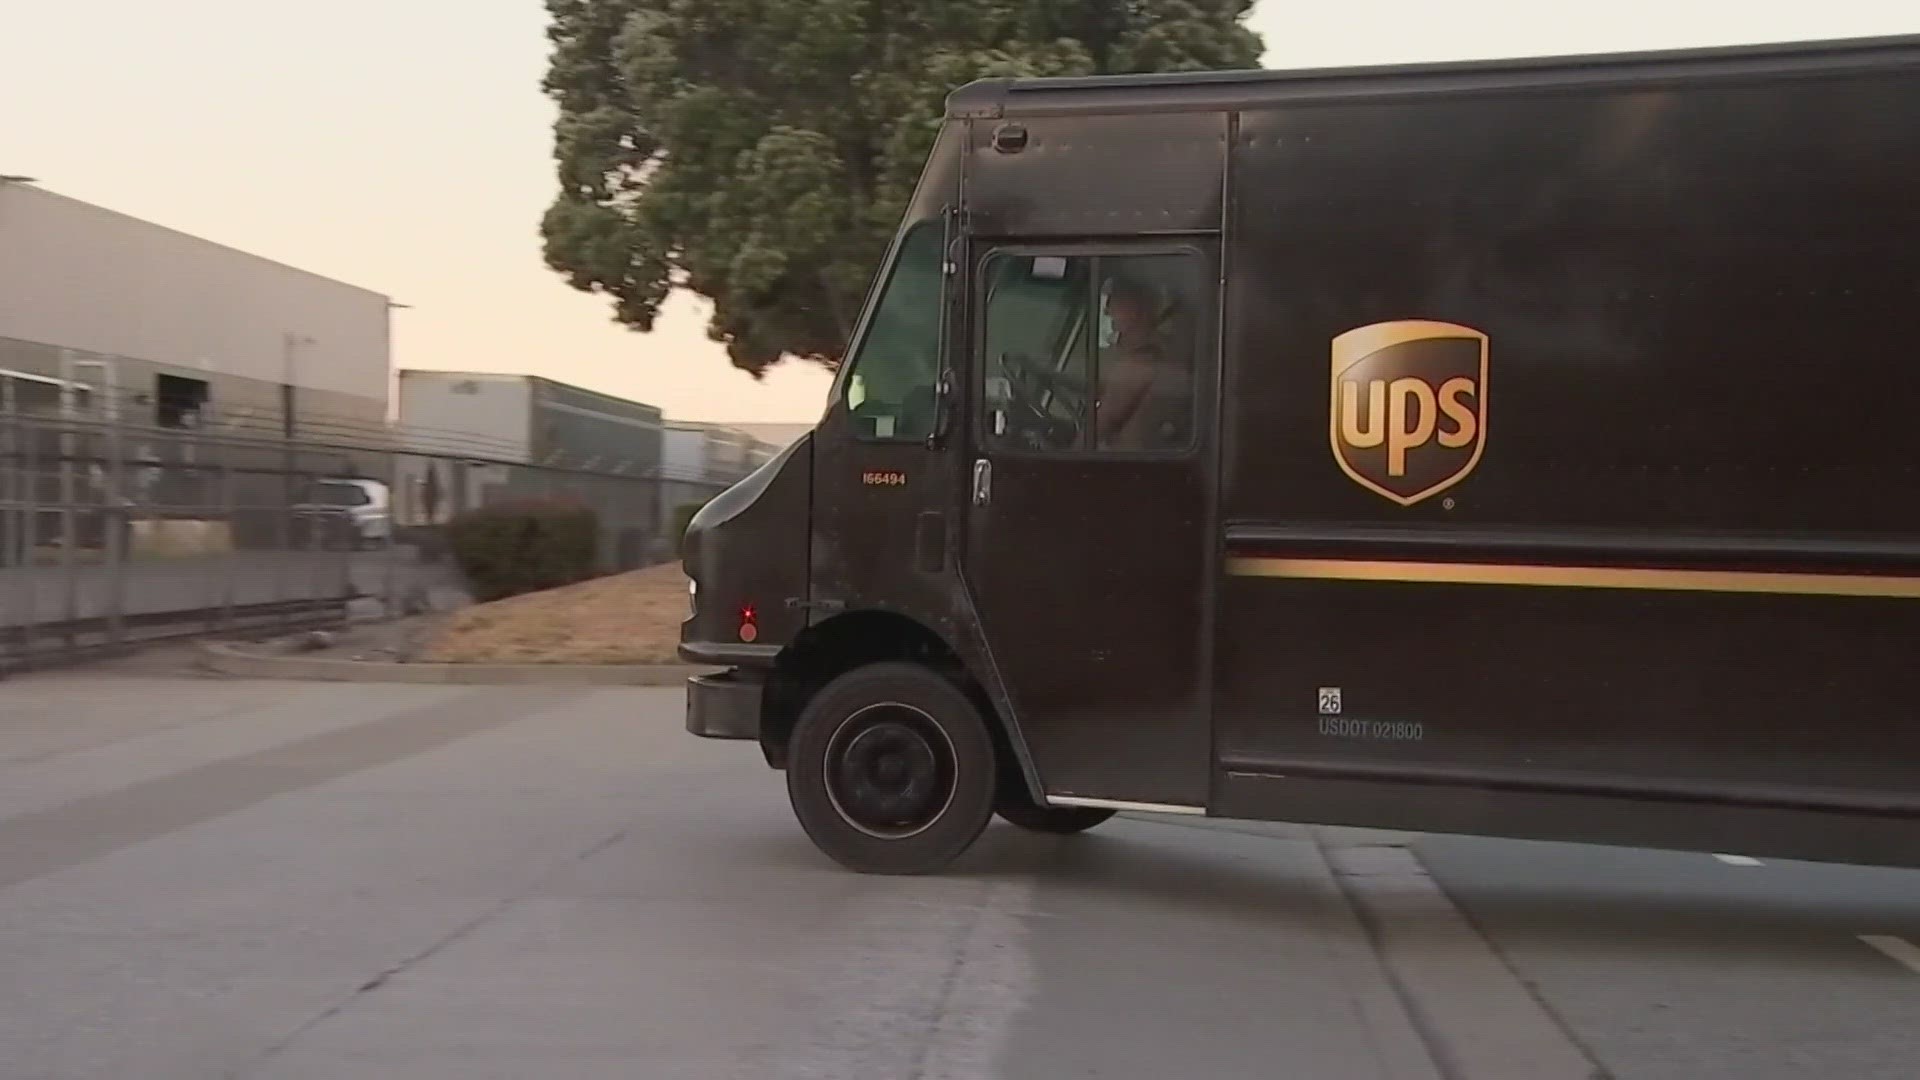 A strike, which could have begun in August, could have been a major issue in the U.S. UPS delivers about a quarter of the nation's packages each day.